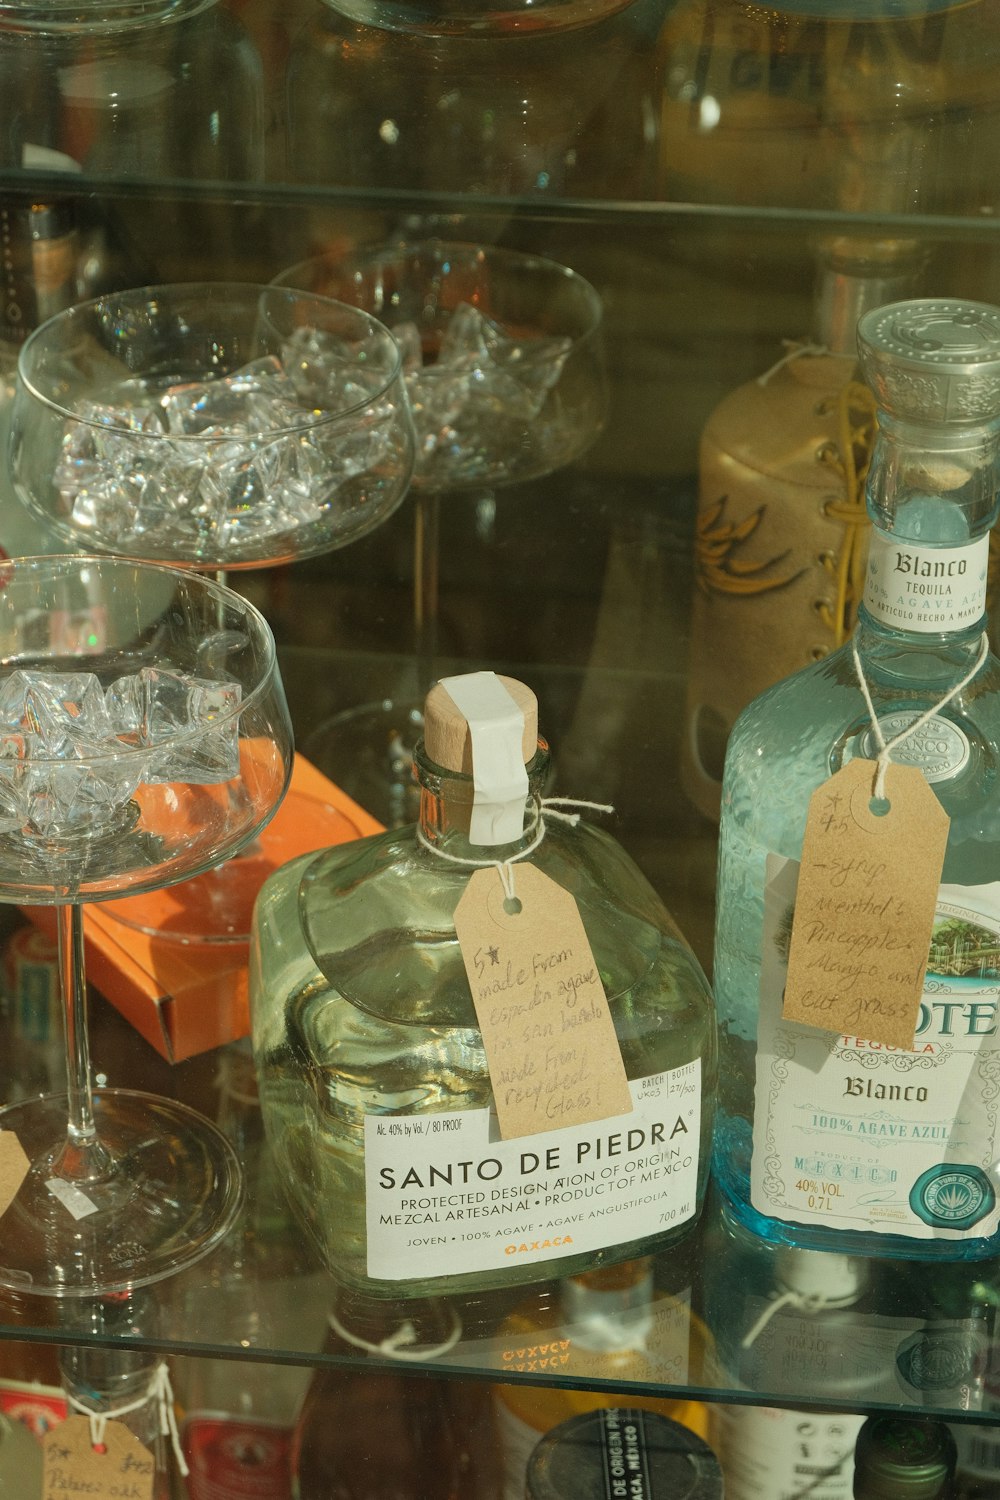 bottles of alcohol are on display in a glass case